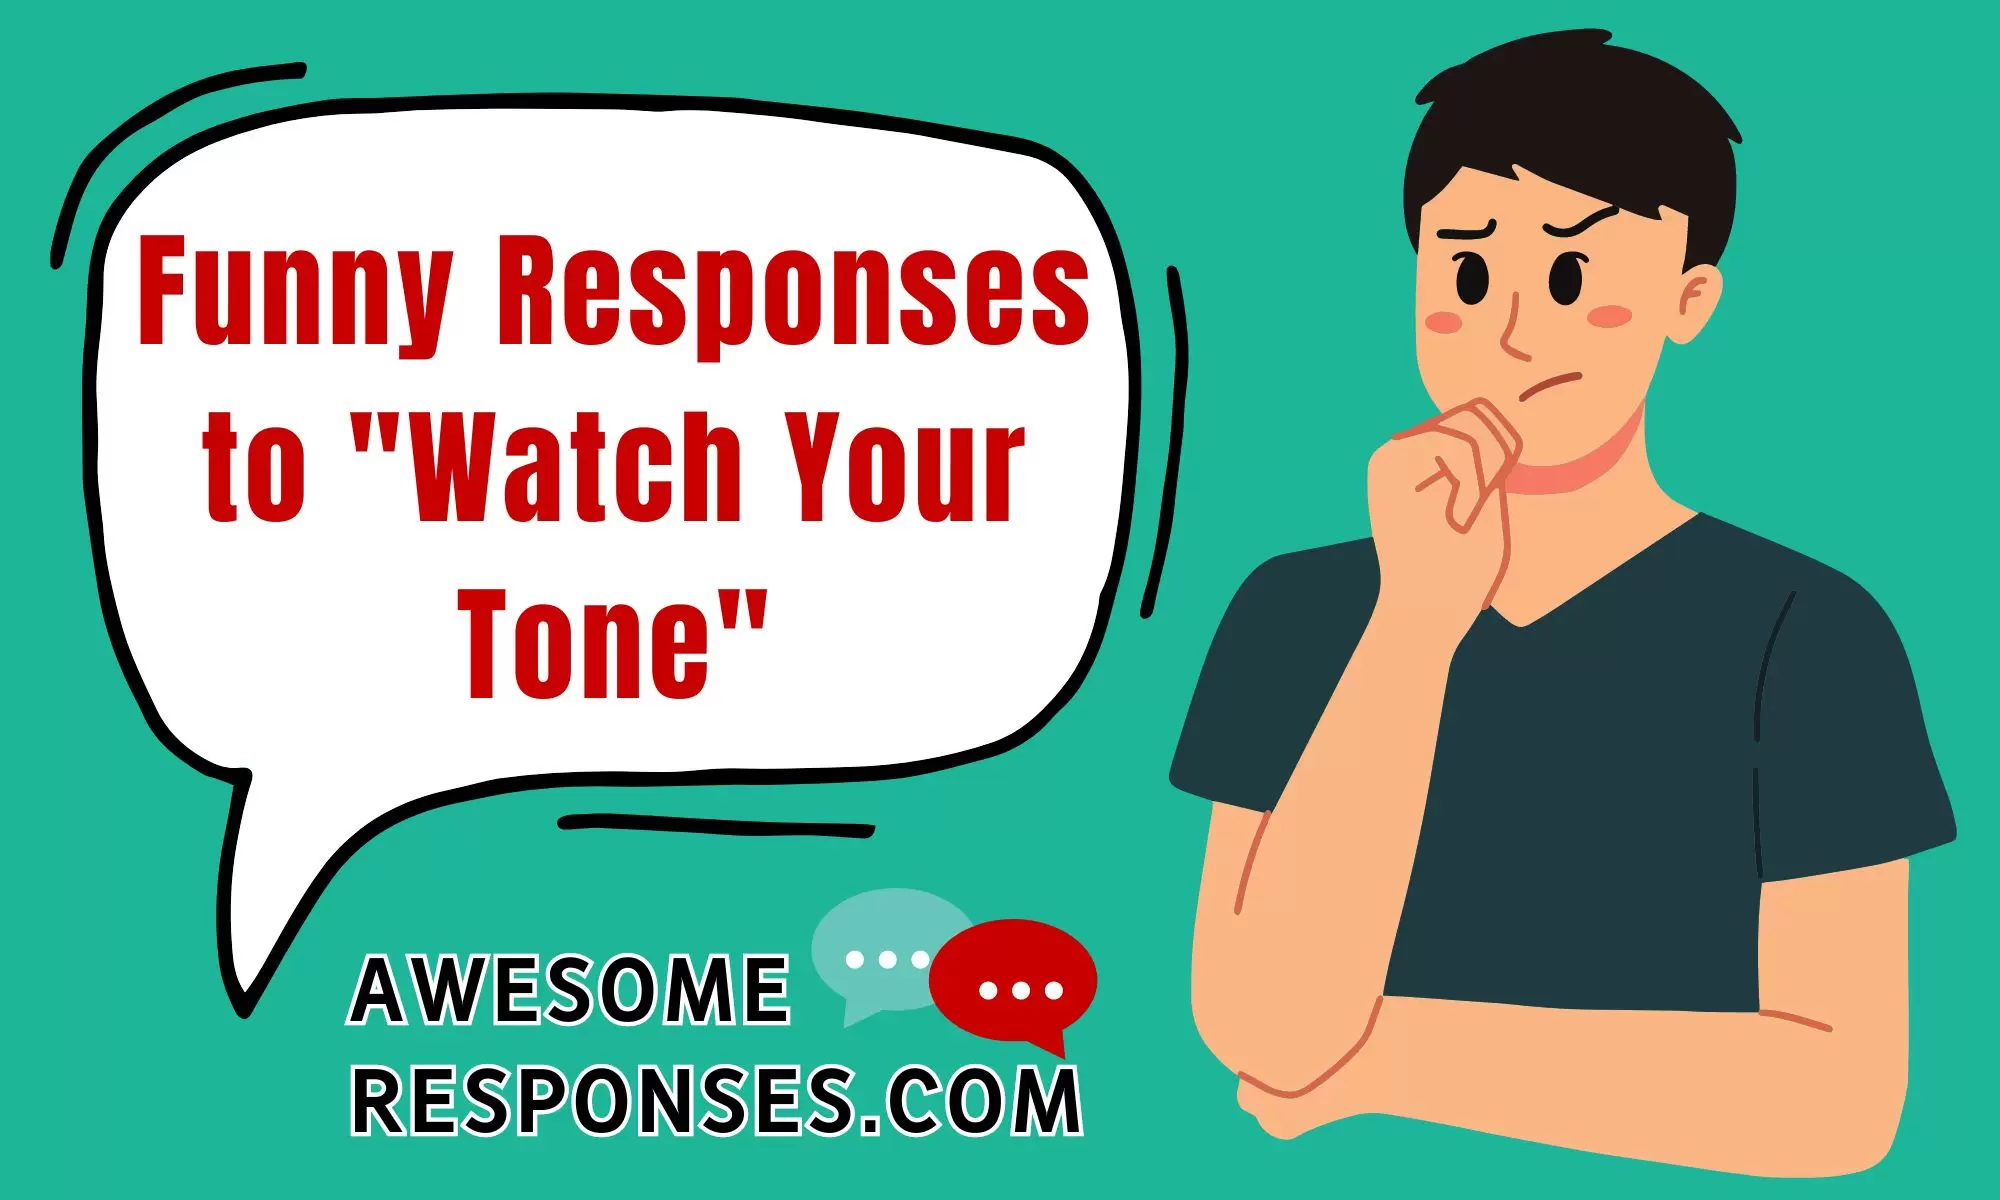 Funny Responses to "Watch Your Tone"